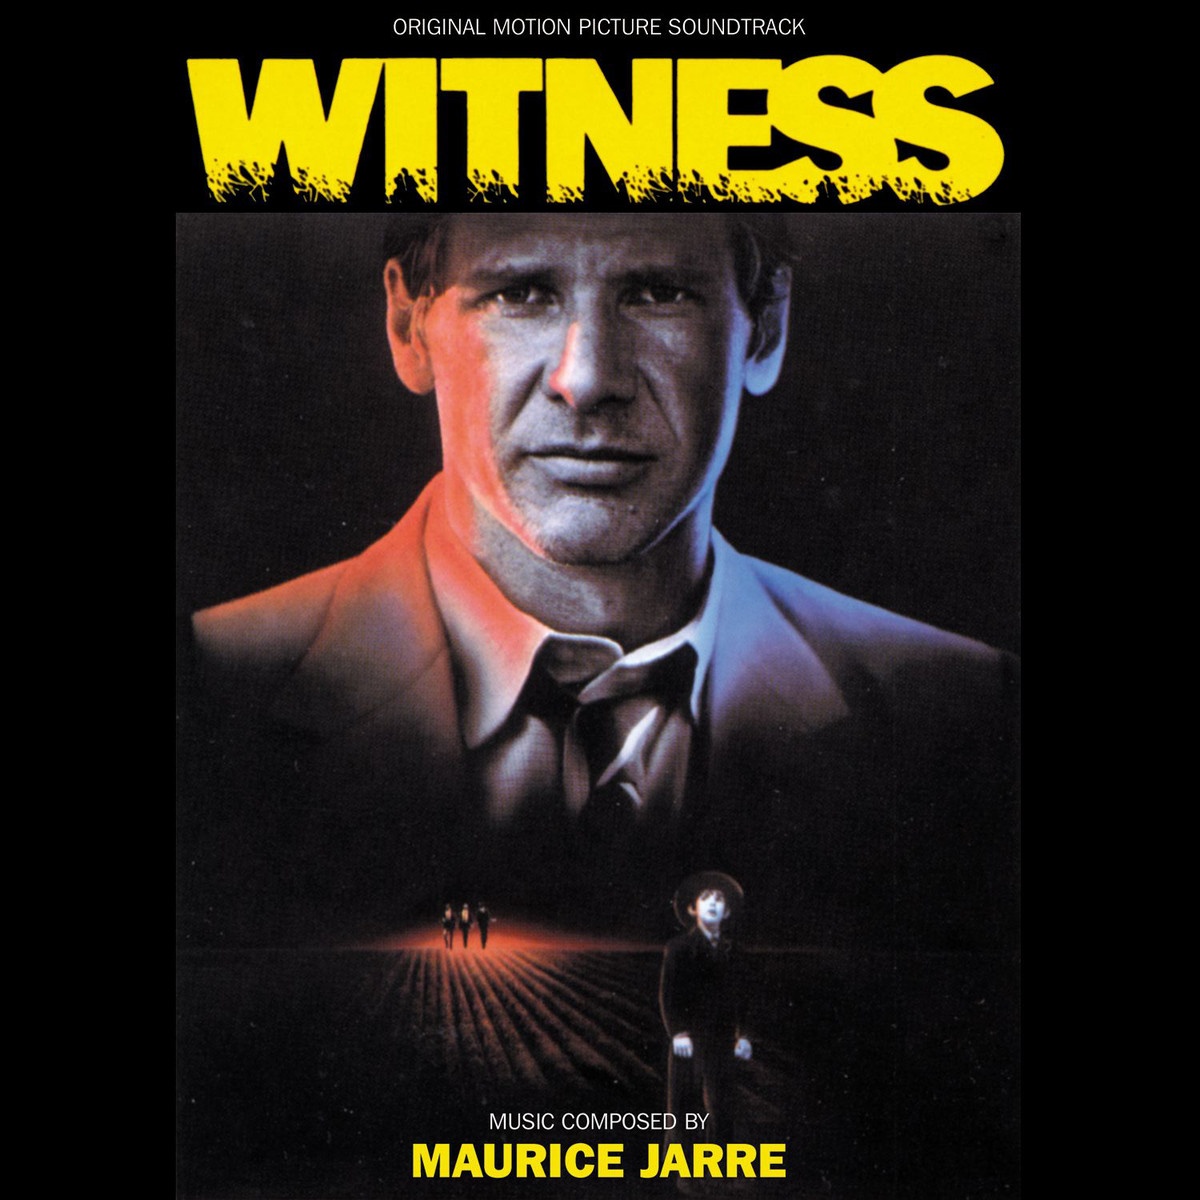 Witness (main title) / Journey To Baltimore